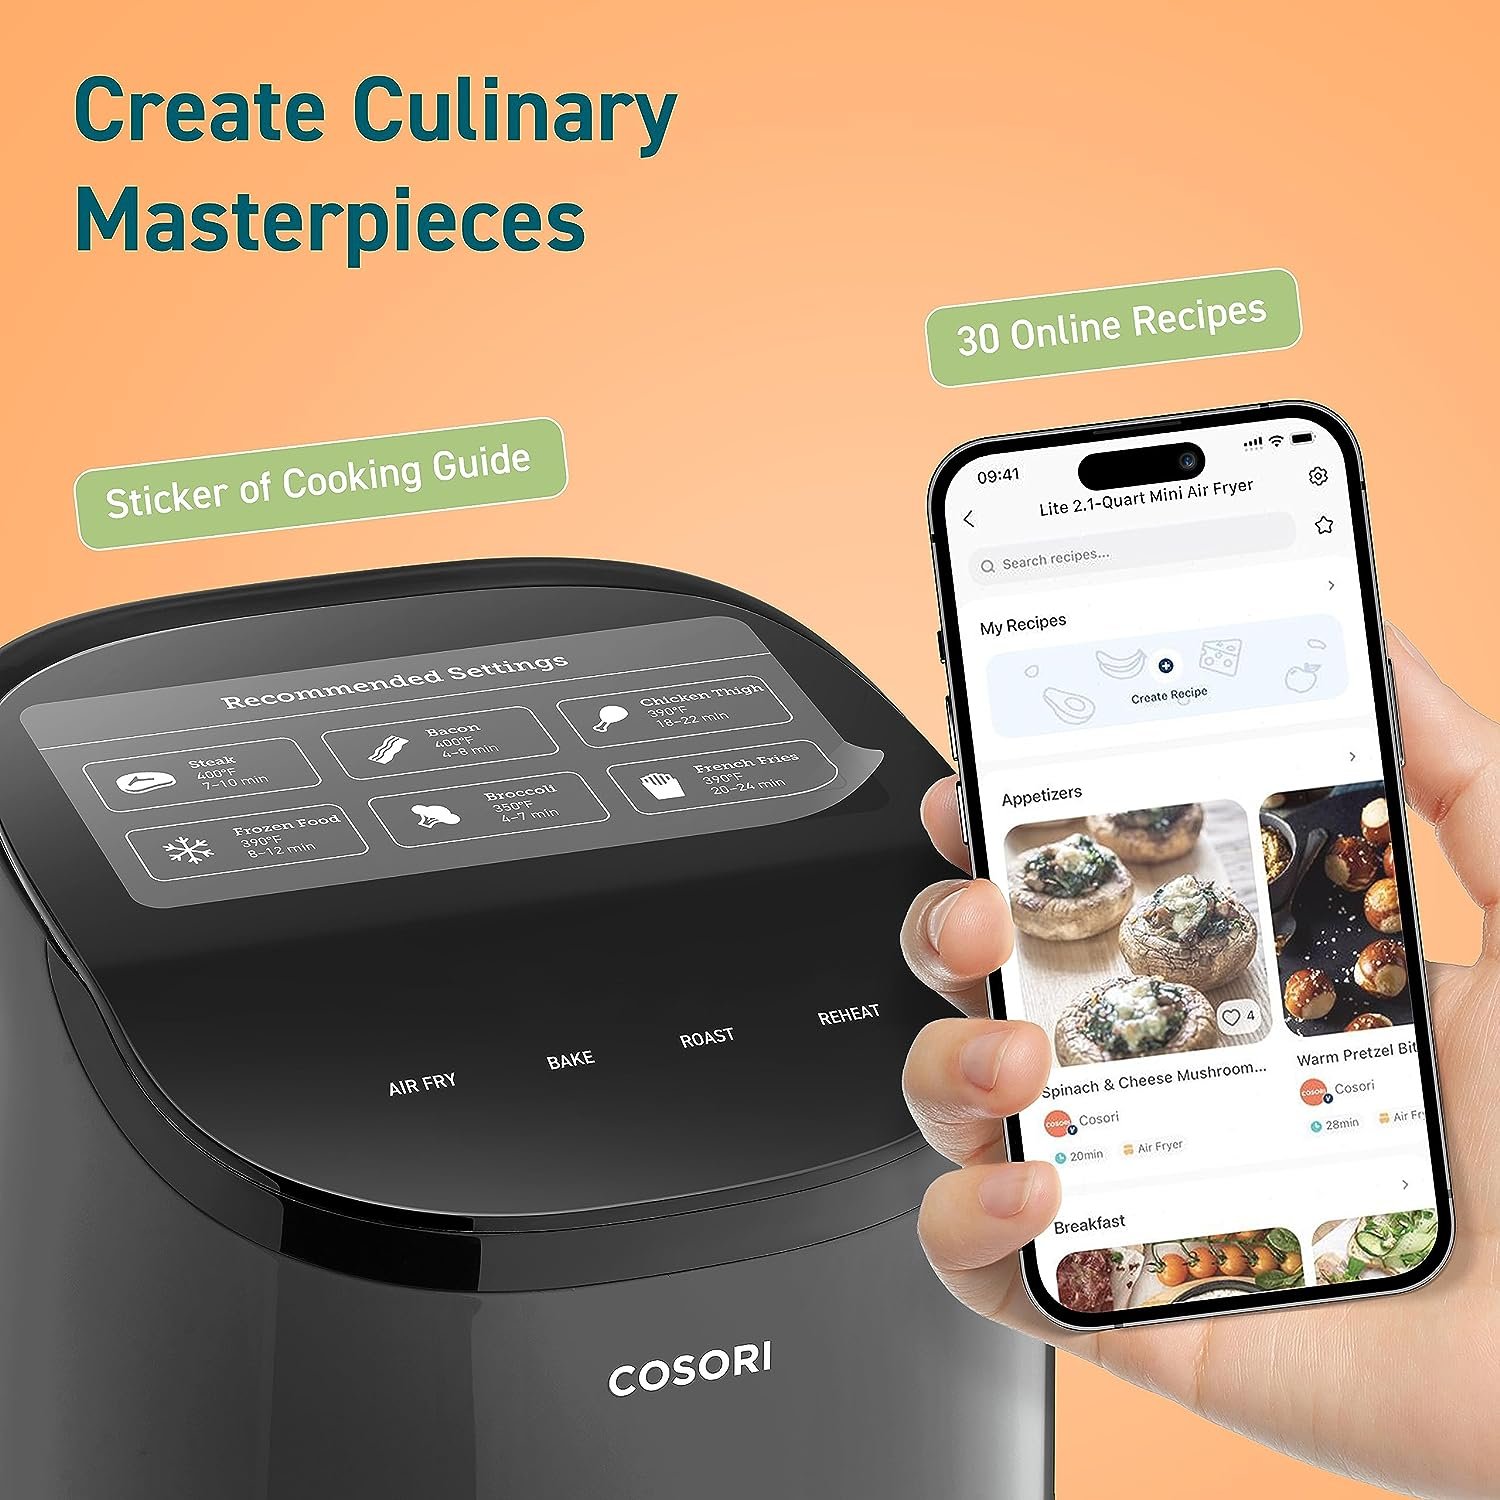 COSORI Small Air Fryer Oven 2.1 Qt, 4-in-1 Mini Airfryer, Bake, Roast, Reheat, Space-saving  Low-noise, Nonstick and Dishwasher Safe Basket, 30 In-App Recipes, Sticker with 6 Reference Guides, Gray